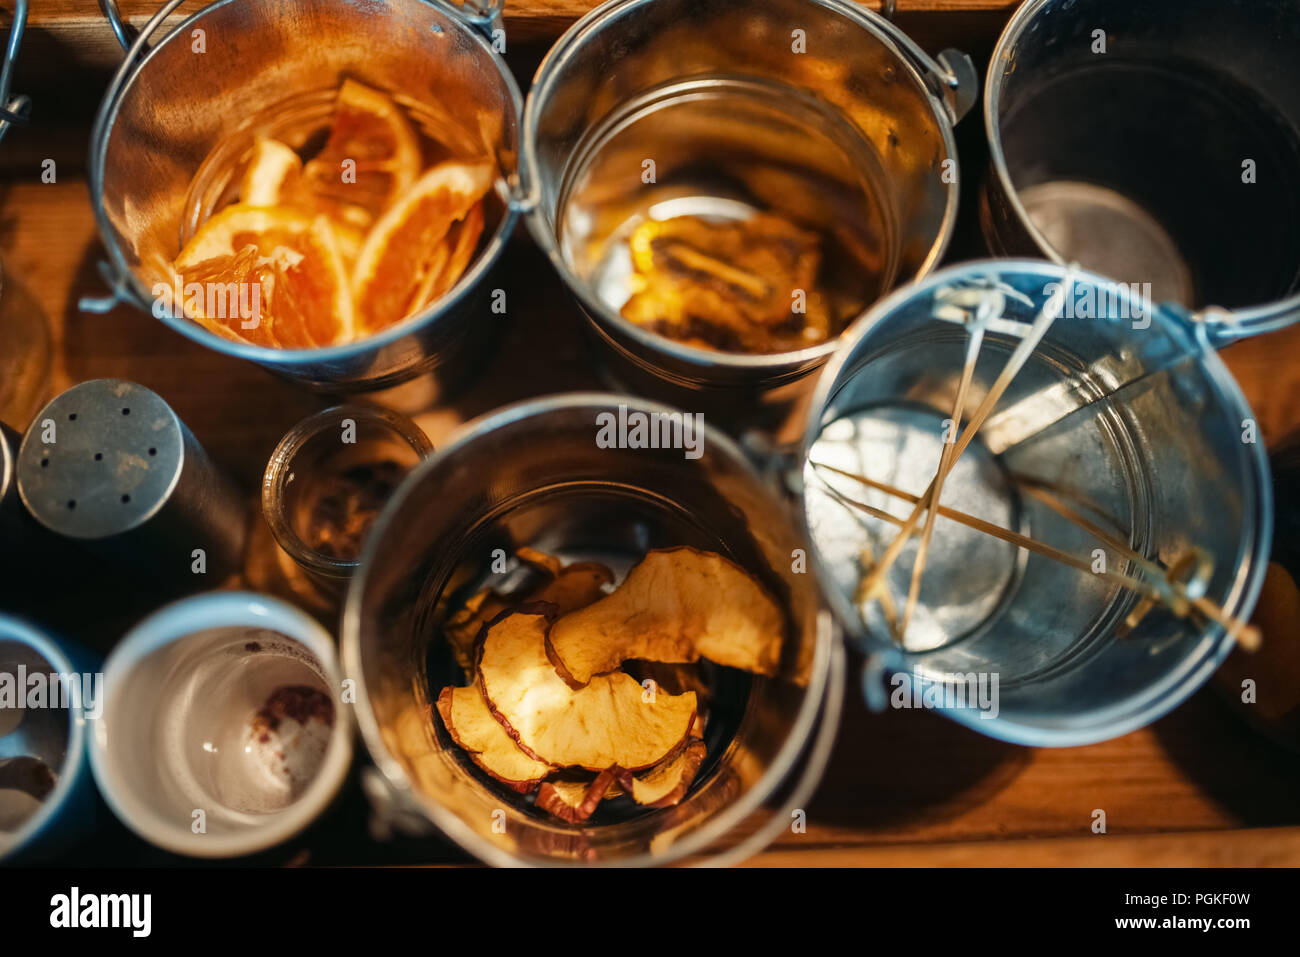 Buckets with beverages closeup, top view, nobody. Alcoholic drinks preparation, bartending Stock Photo